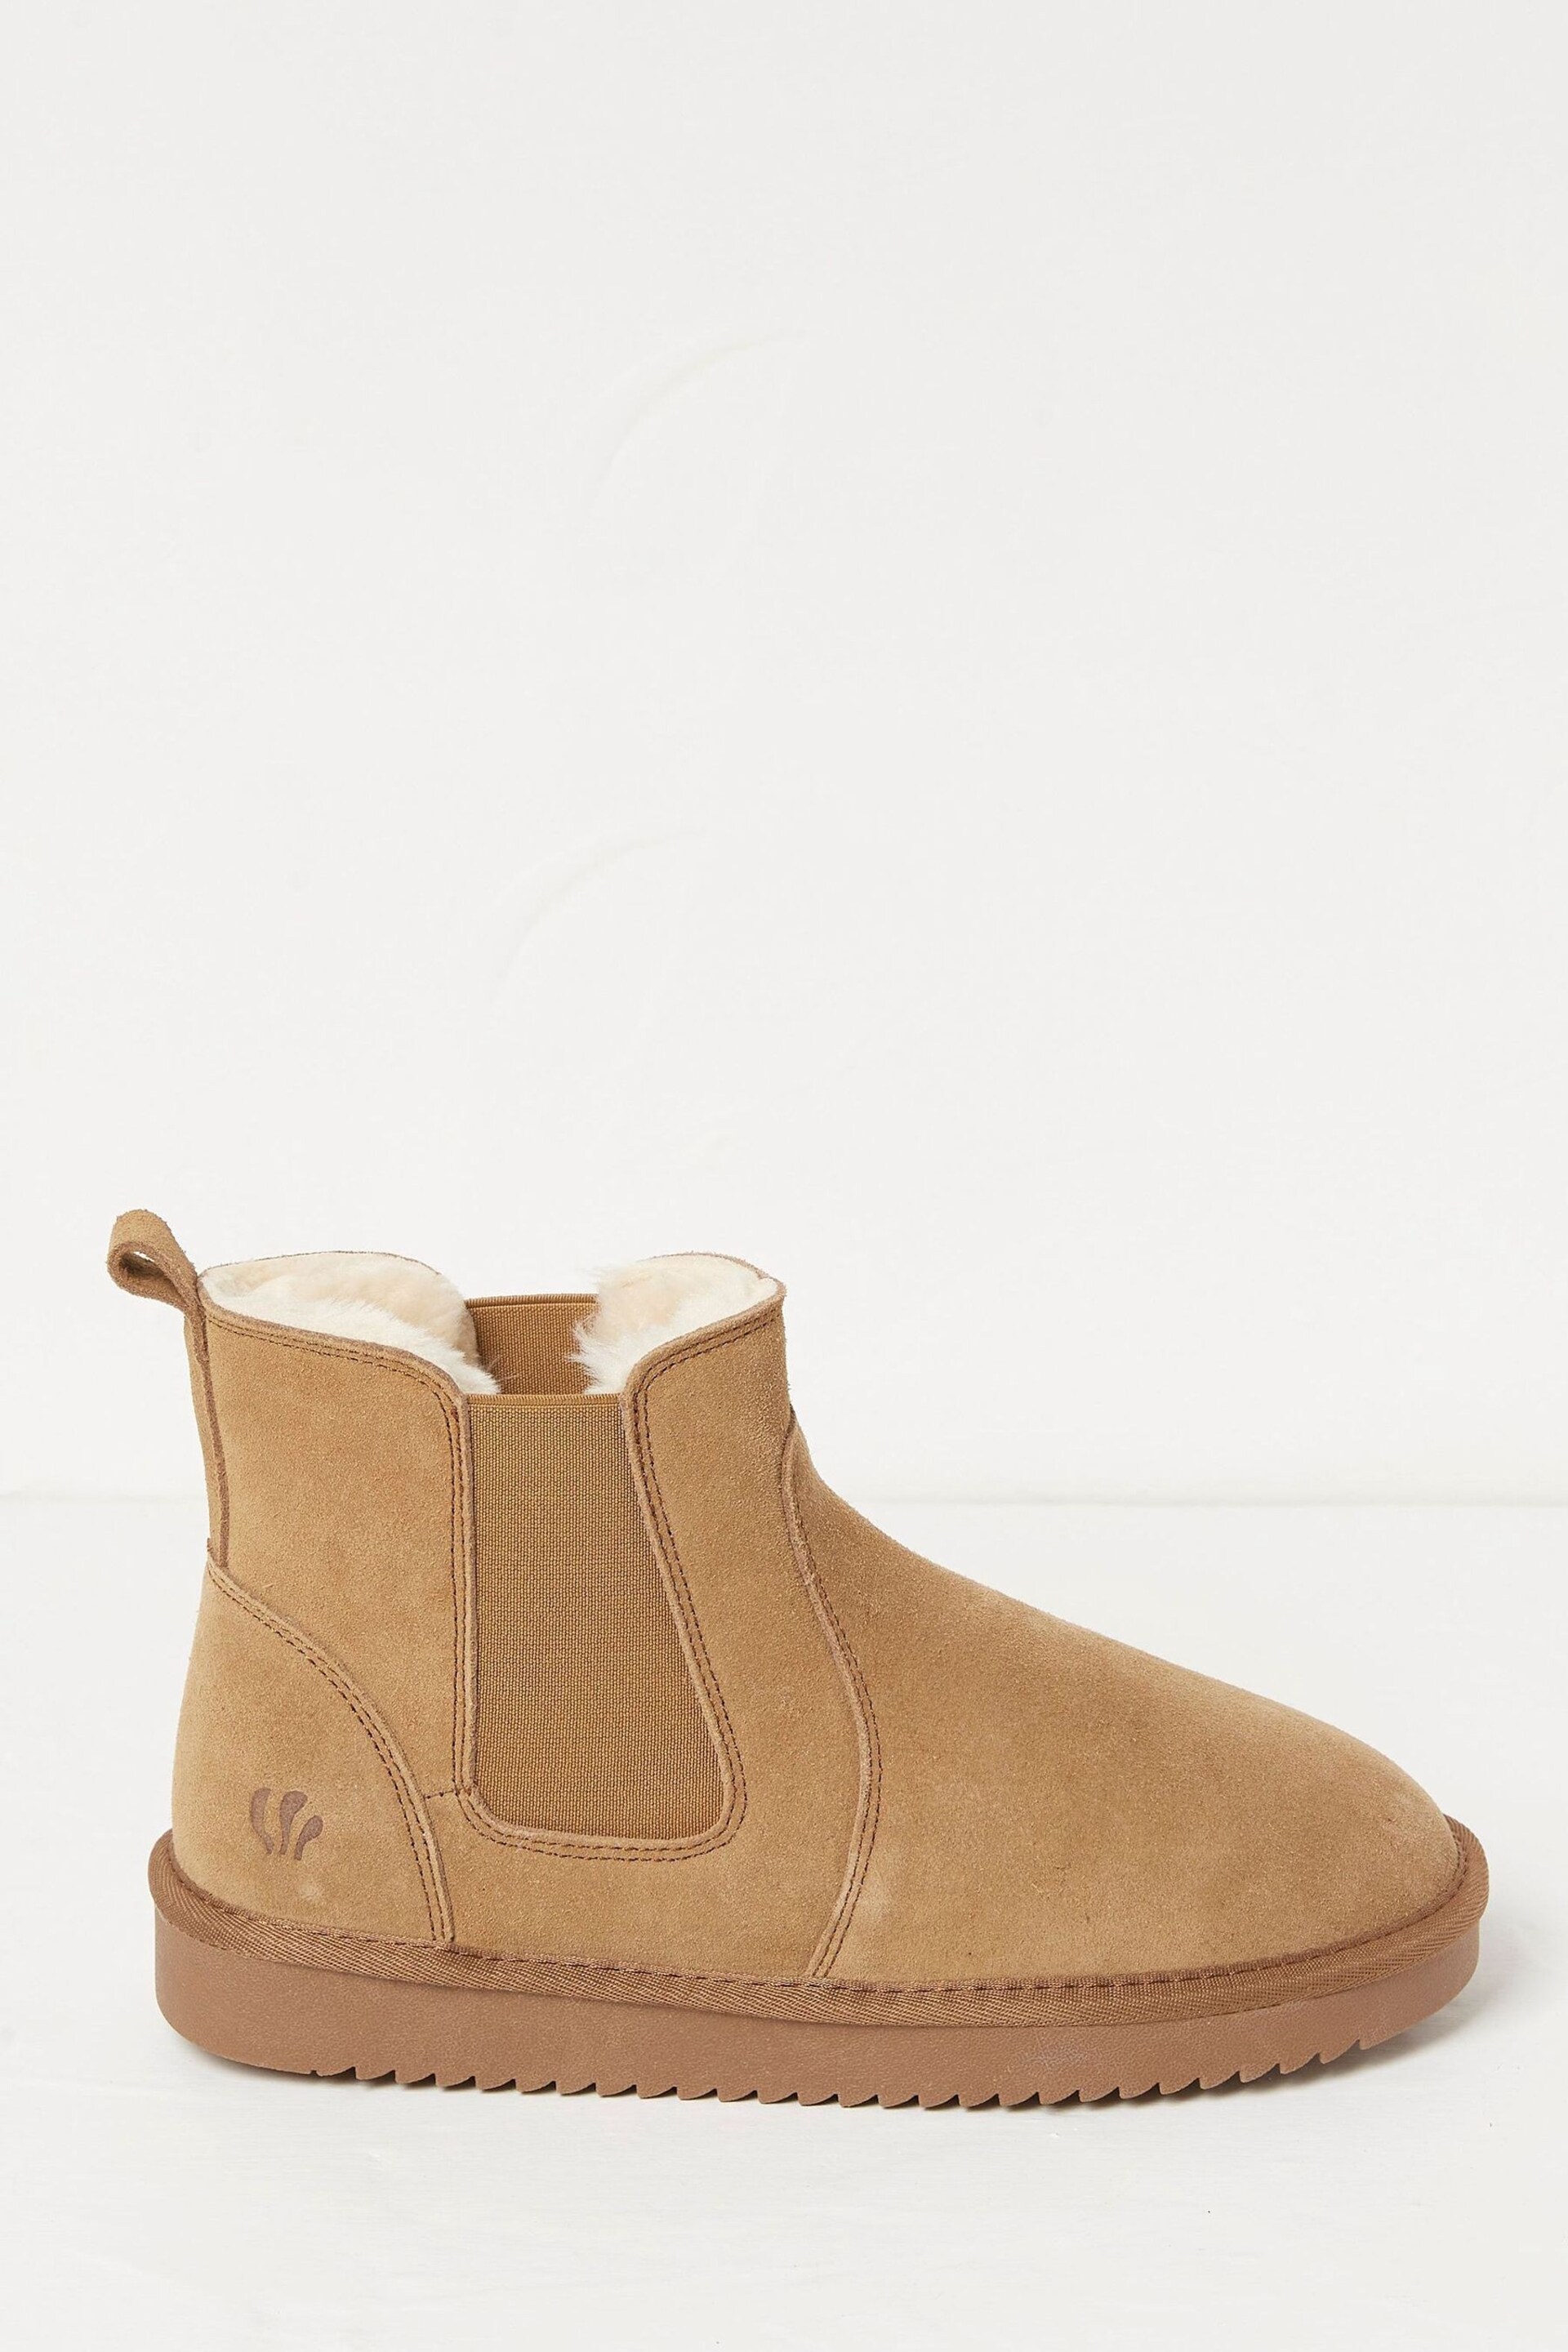 FatFace Brown Mini Suede Chelsea Boots - Image 1 of 3